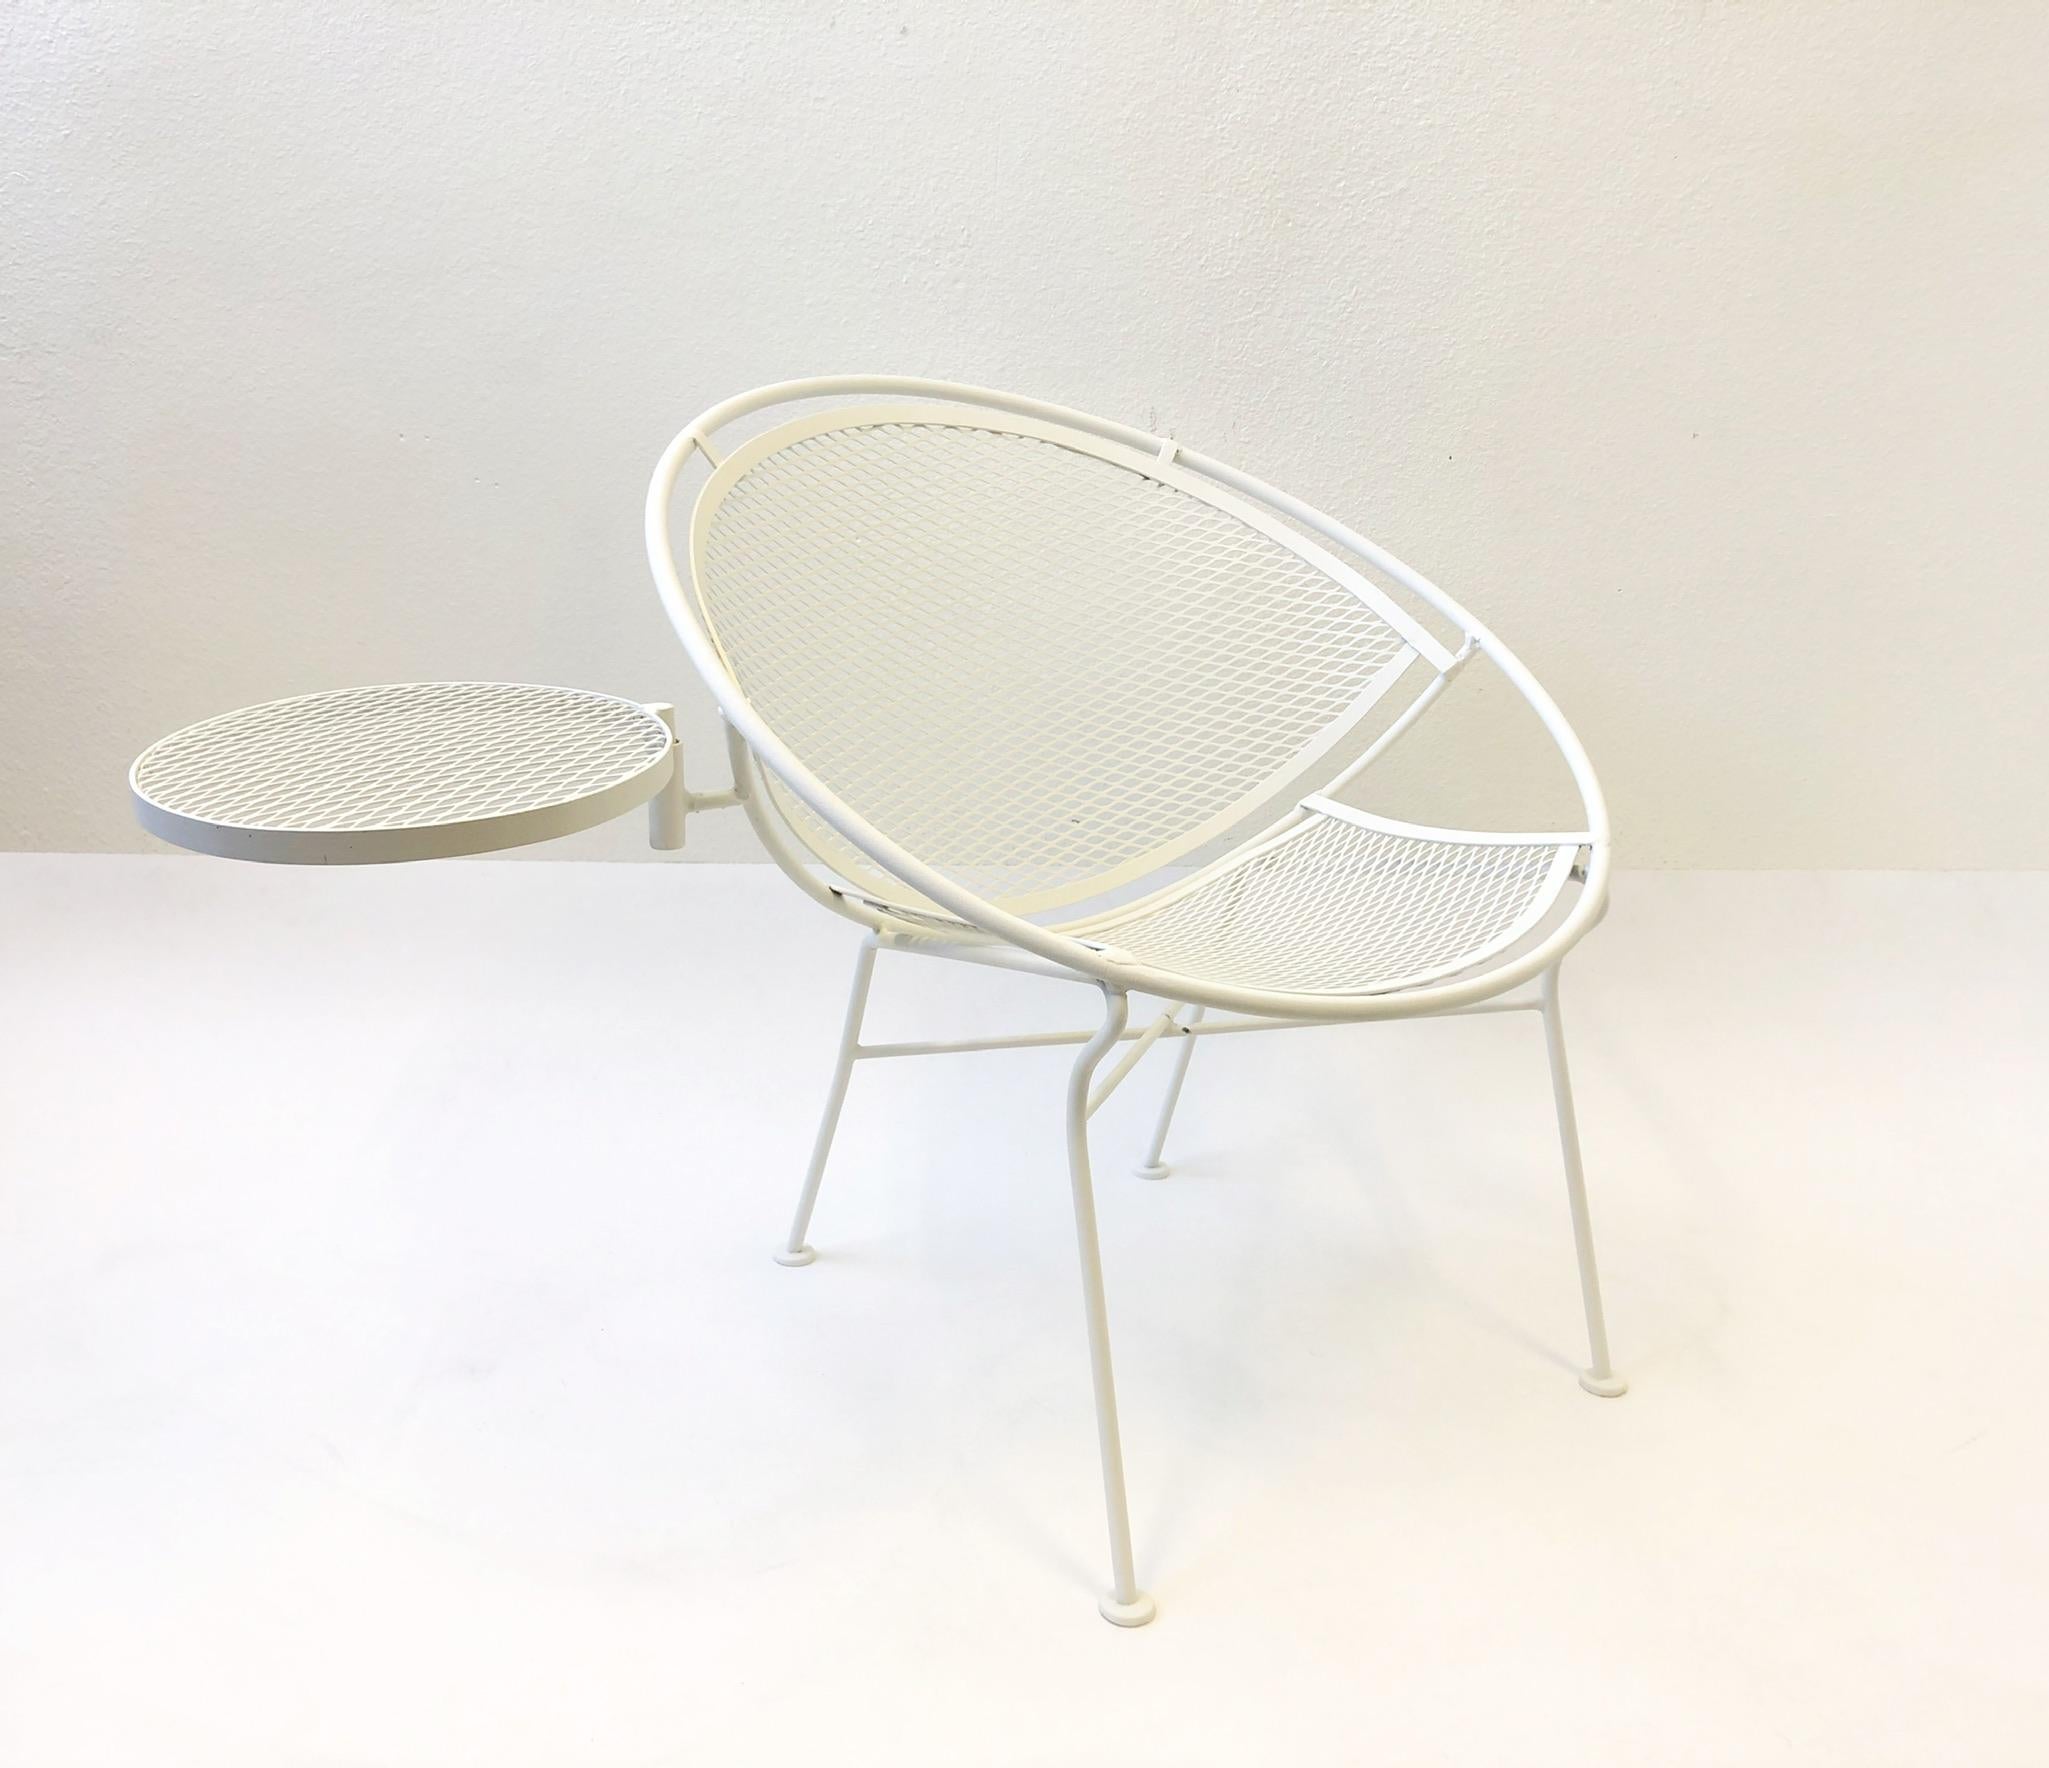 Steel Set of Four White Powder Coated Patio Chairs by Salterini